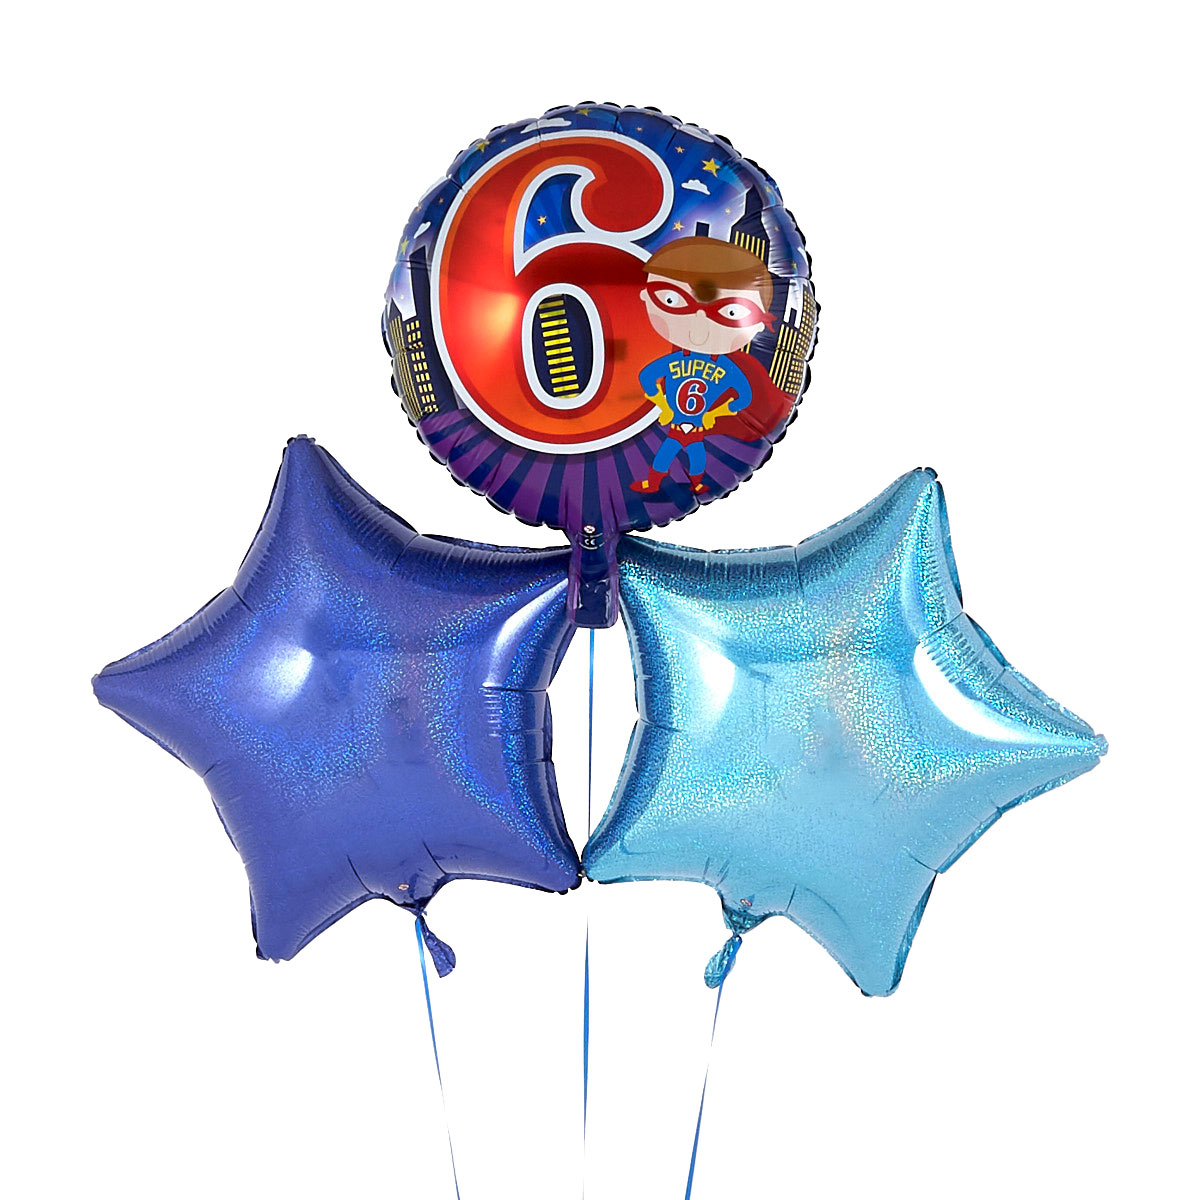 Super 6th Birthday Blue Balloon Bouquet - DELIVERED INFLATED!